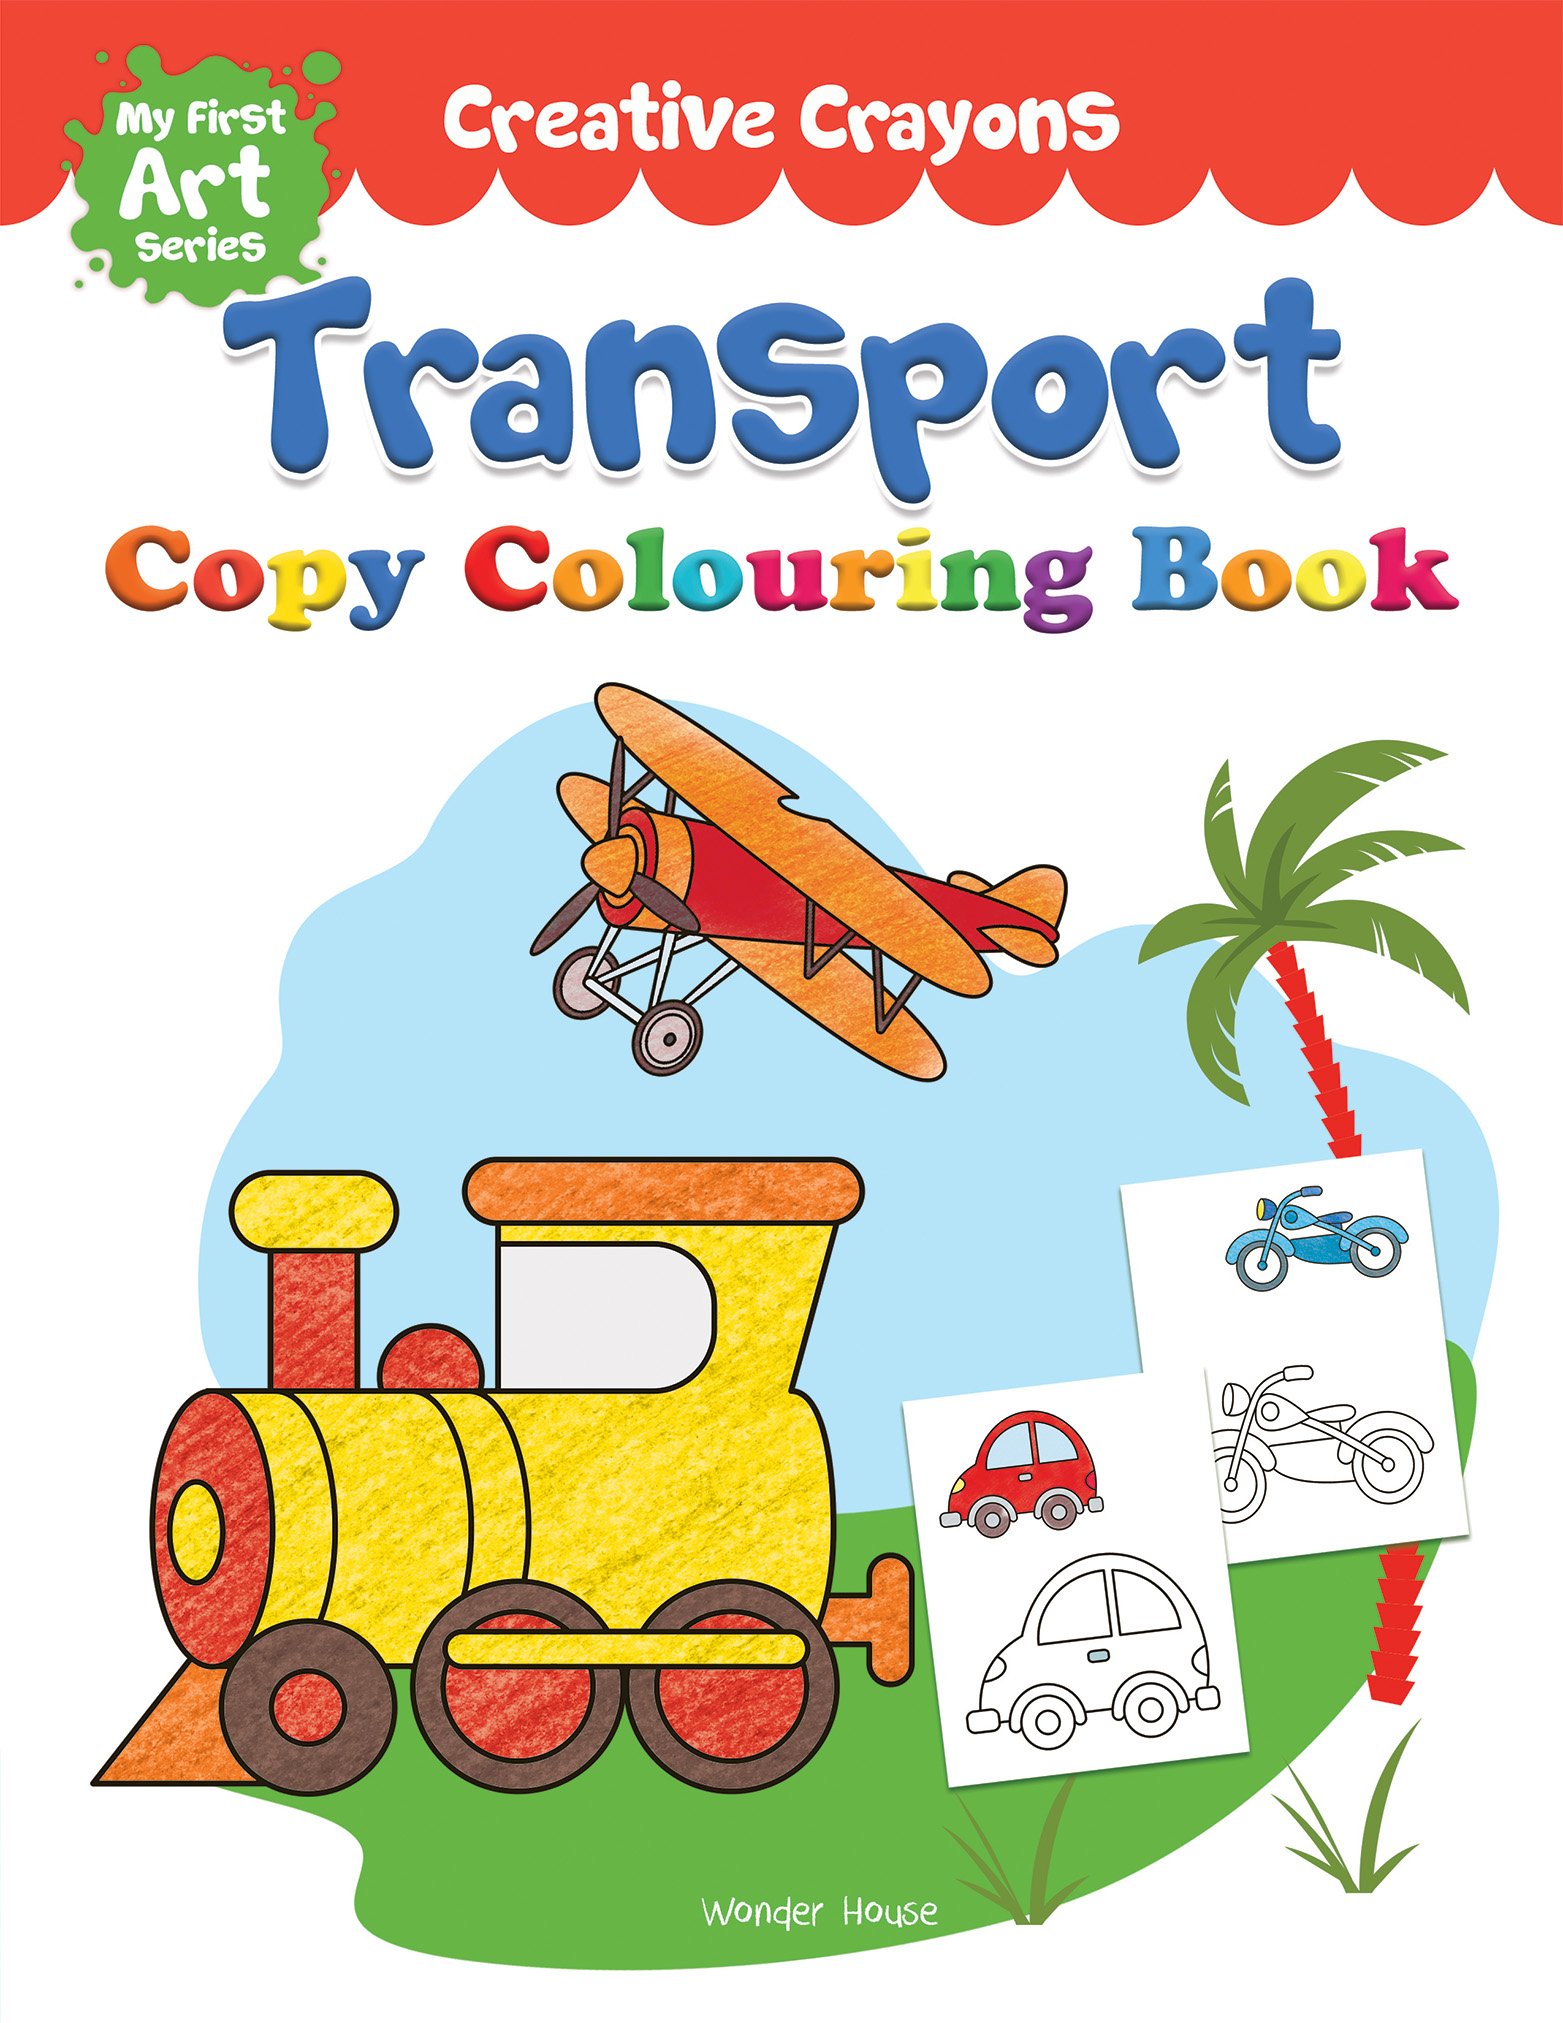 Creative Crayons - Transport : My First Art Series - Crayon Copy Colouring Books